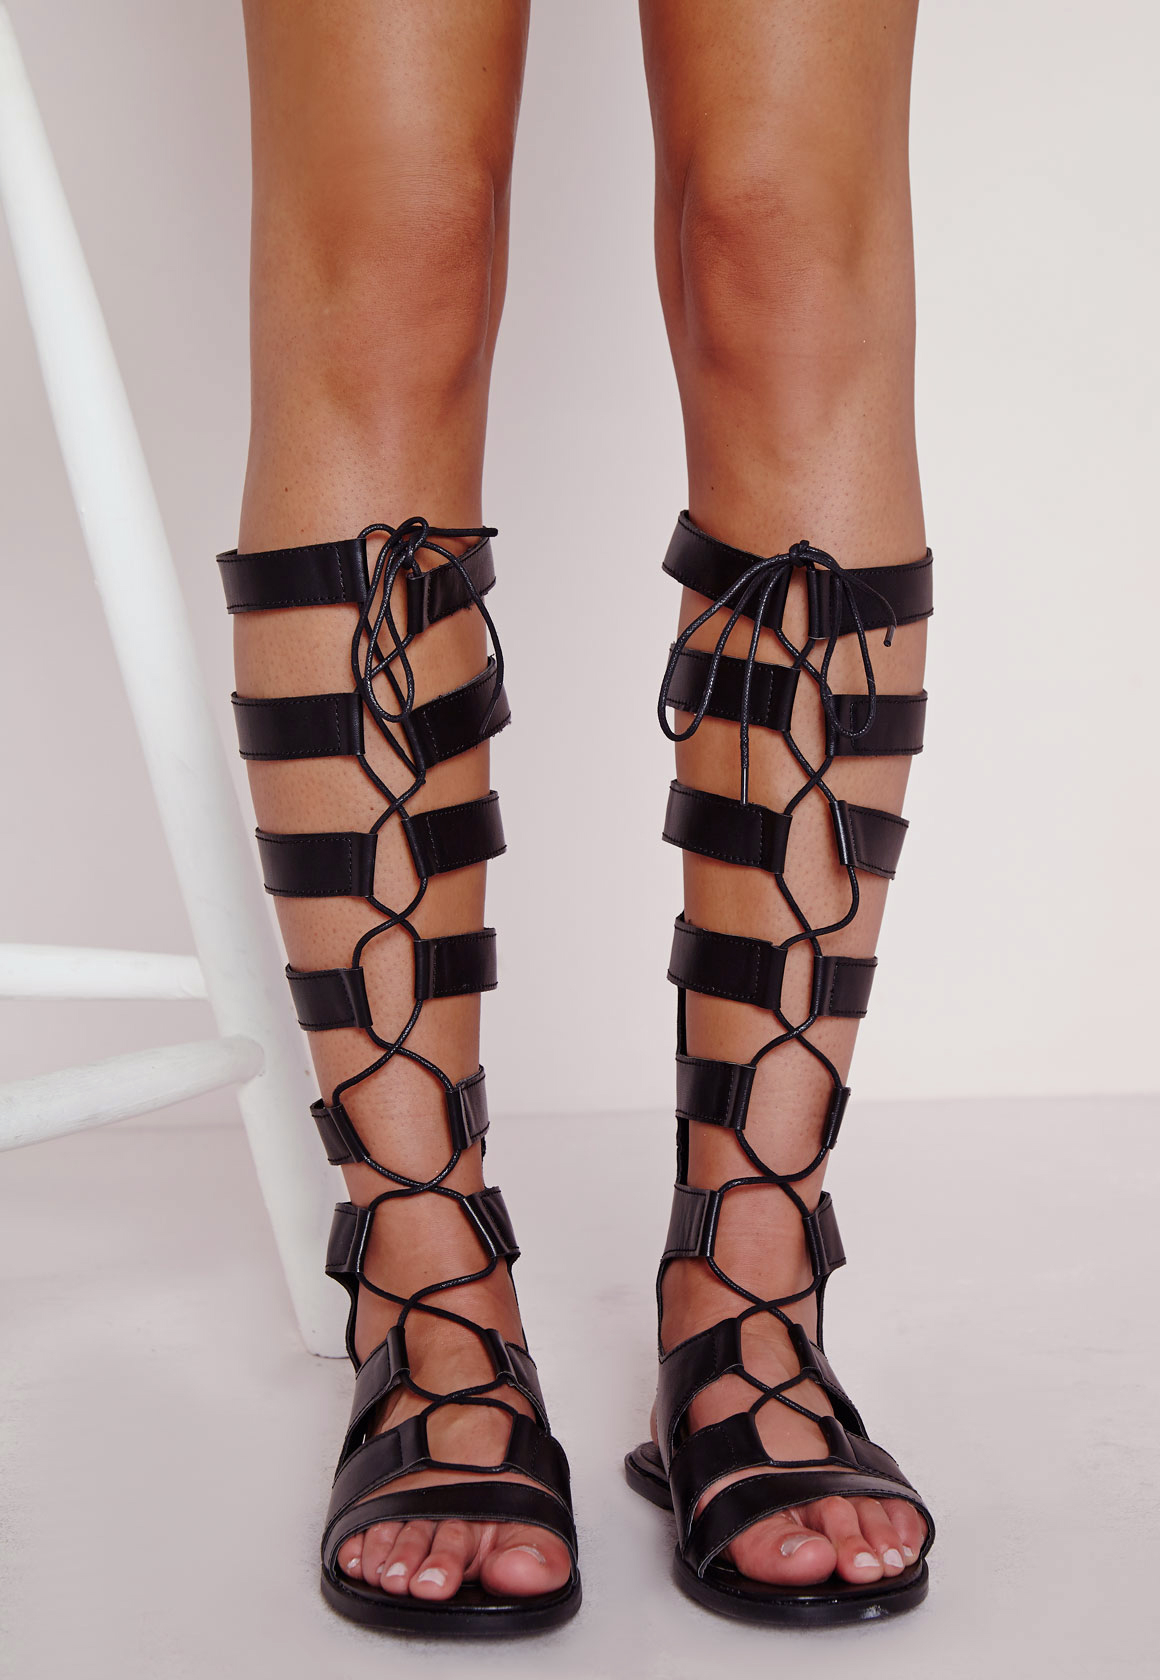 Lyst - Missguided Lace Up Knee High Flat Gladiator Sandals Black in Black